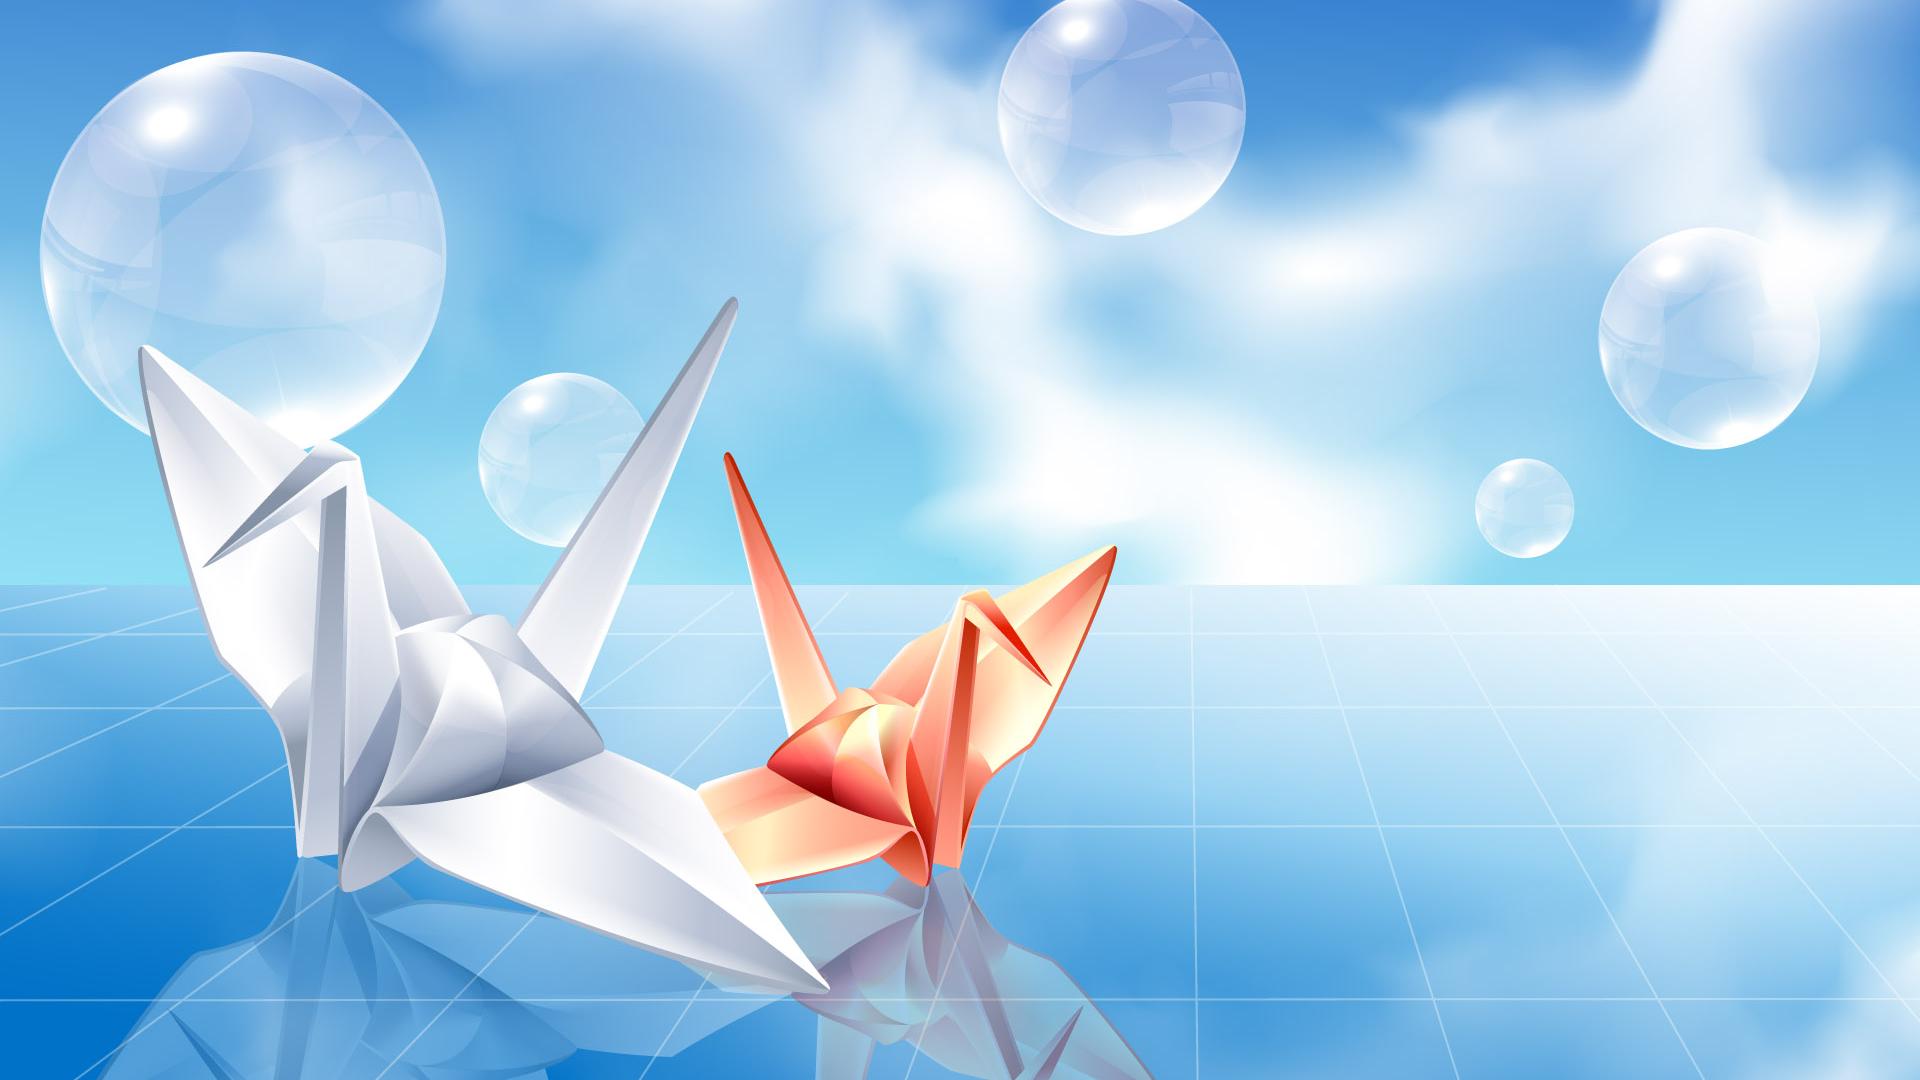 Origami 3d Animation - HD Wallpaper 